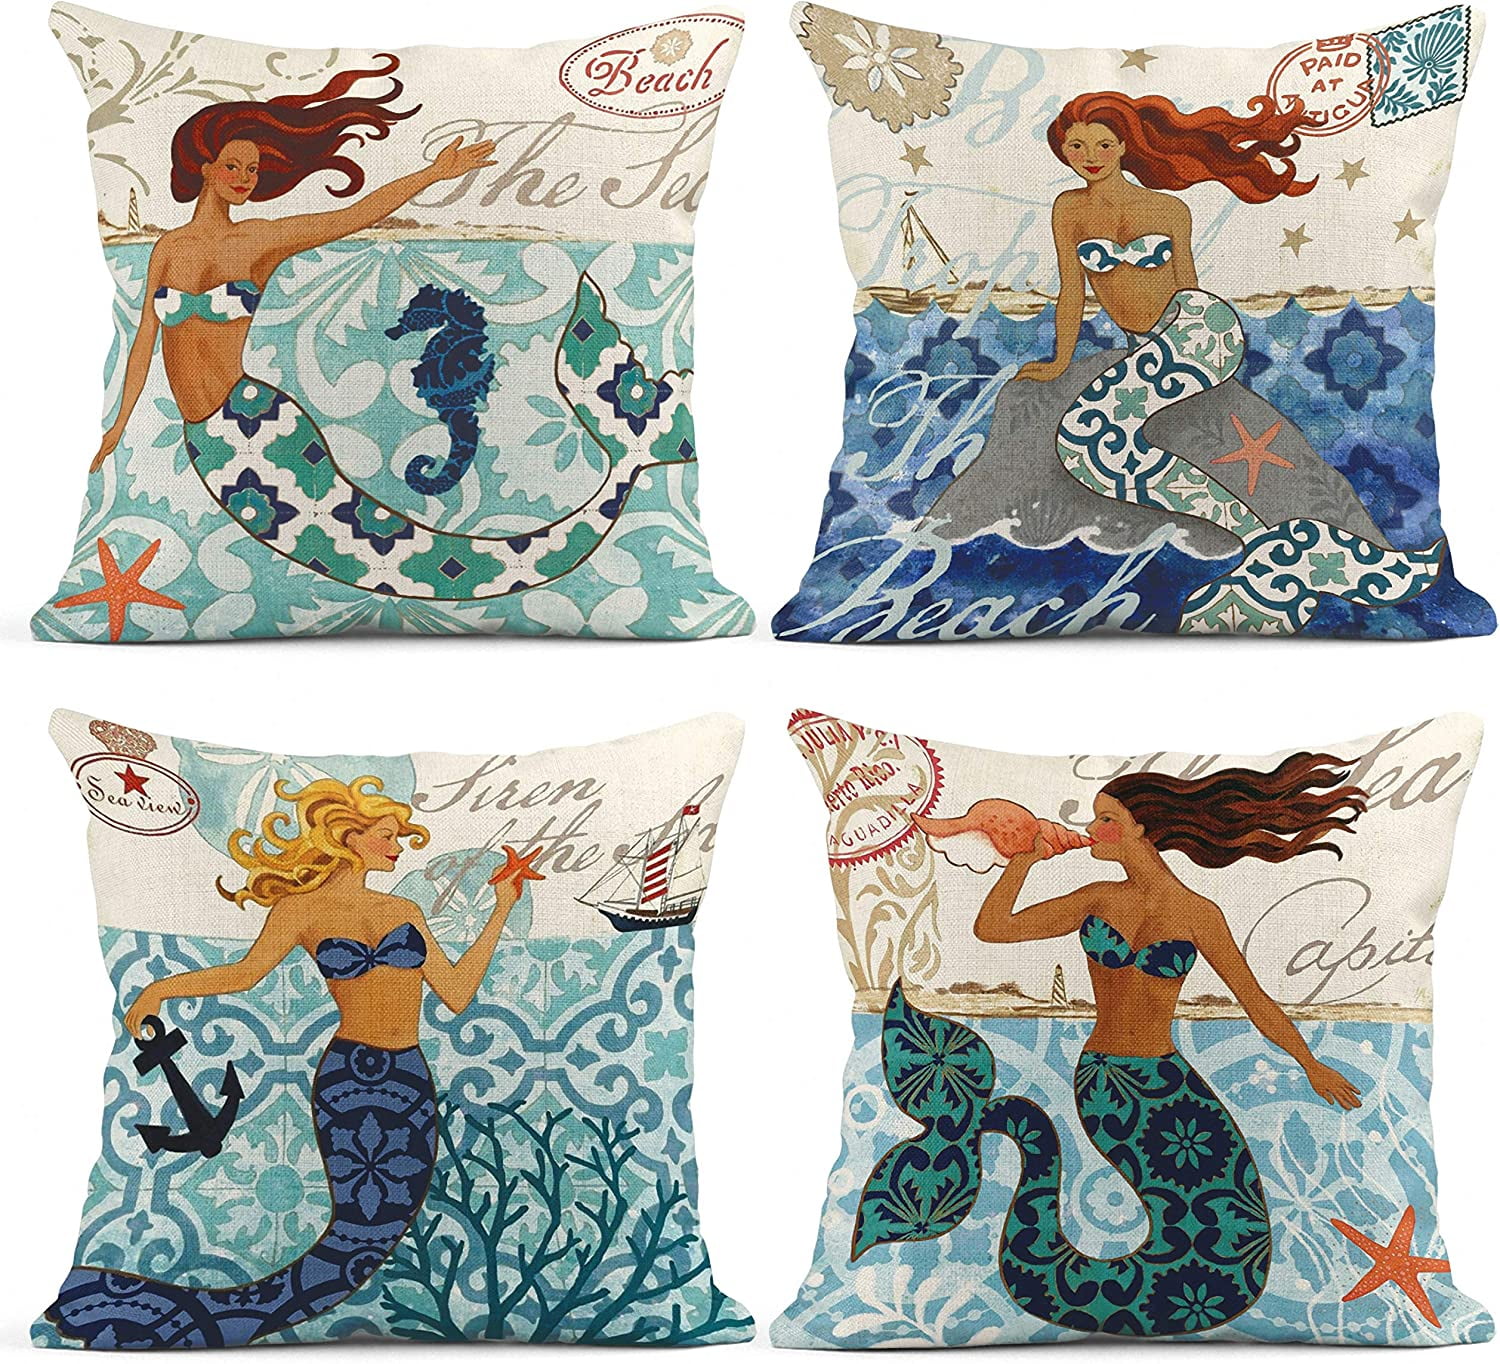 16 x 16 Inch Set of 2 Blue Mermaid Decorative Cushion Covers Birthday Xmas Gift Throw Pillow Covers for Sofa Chair Bed Car WERNNSAI Sequins Mermaid Pillow Cases NO Pillow Inserts 